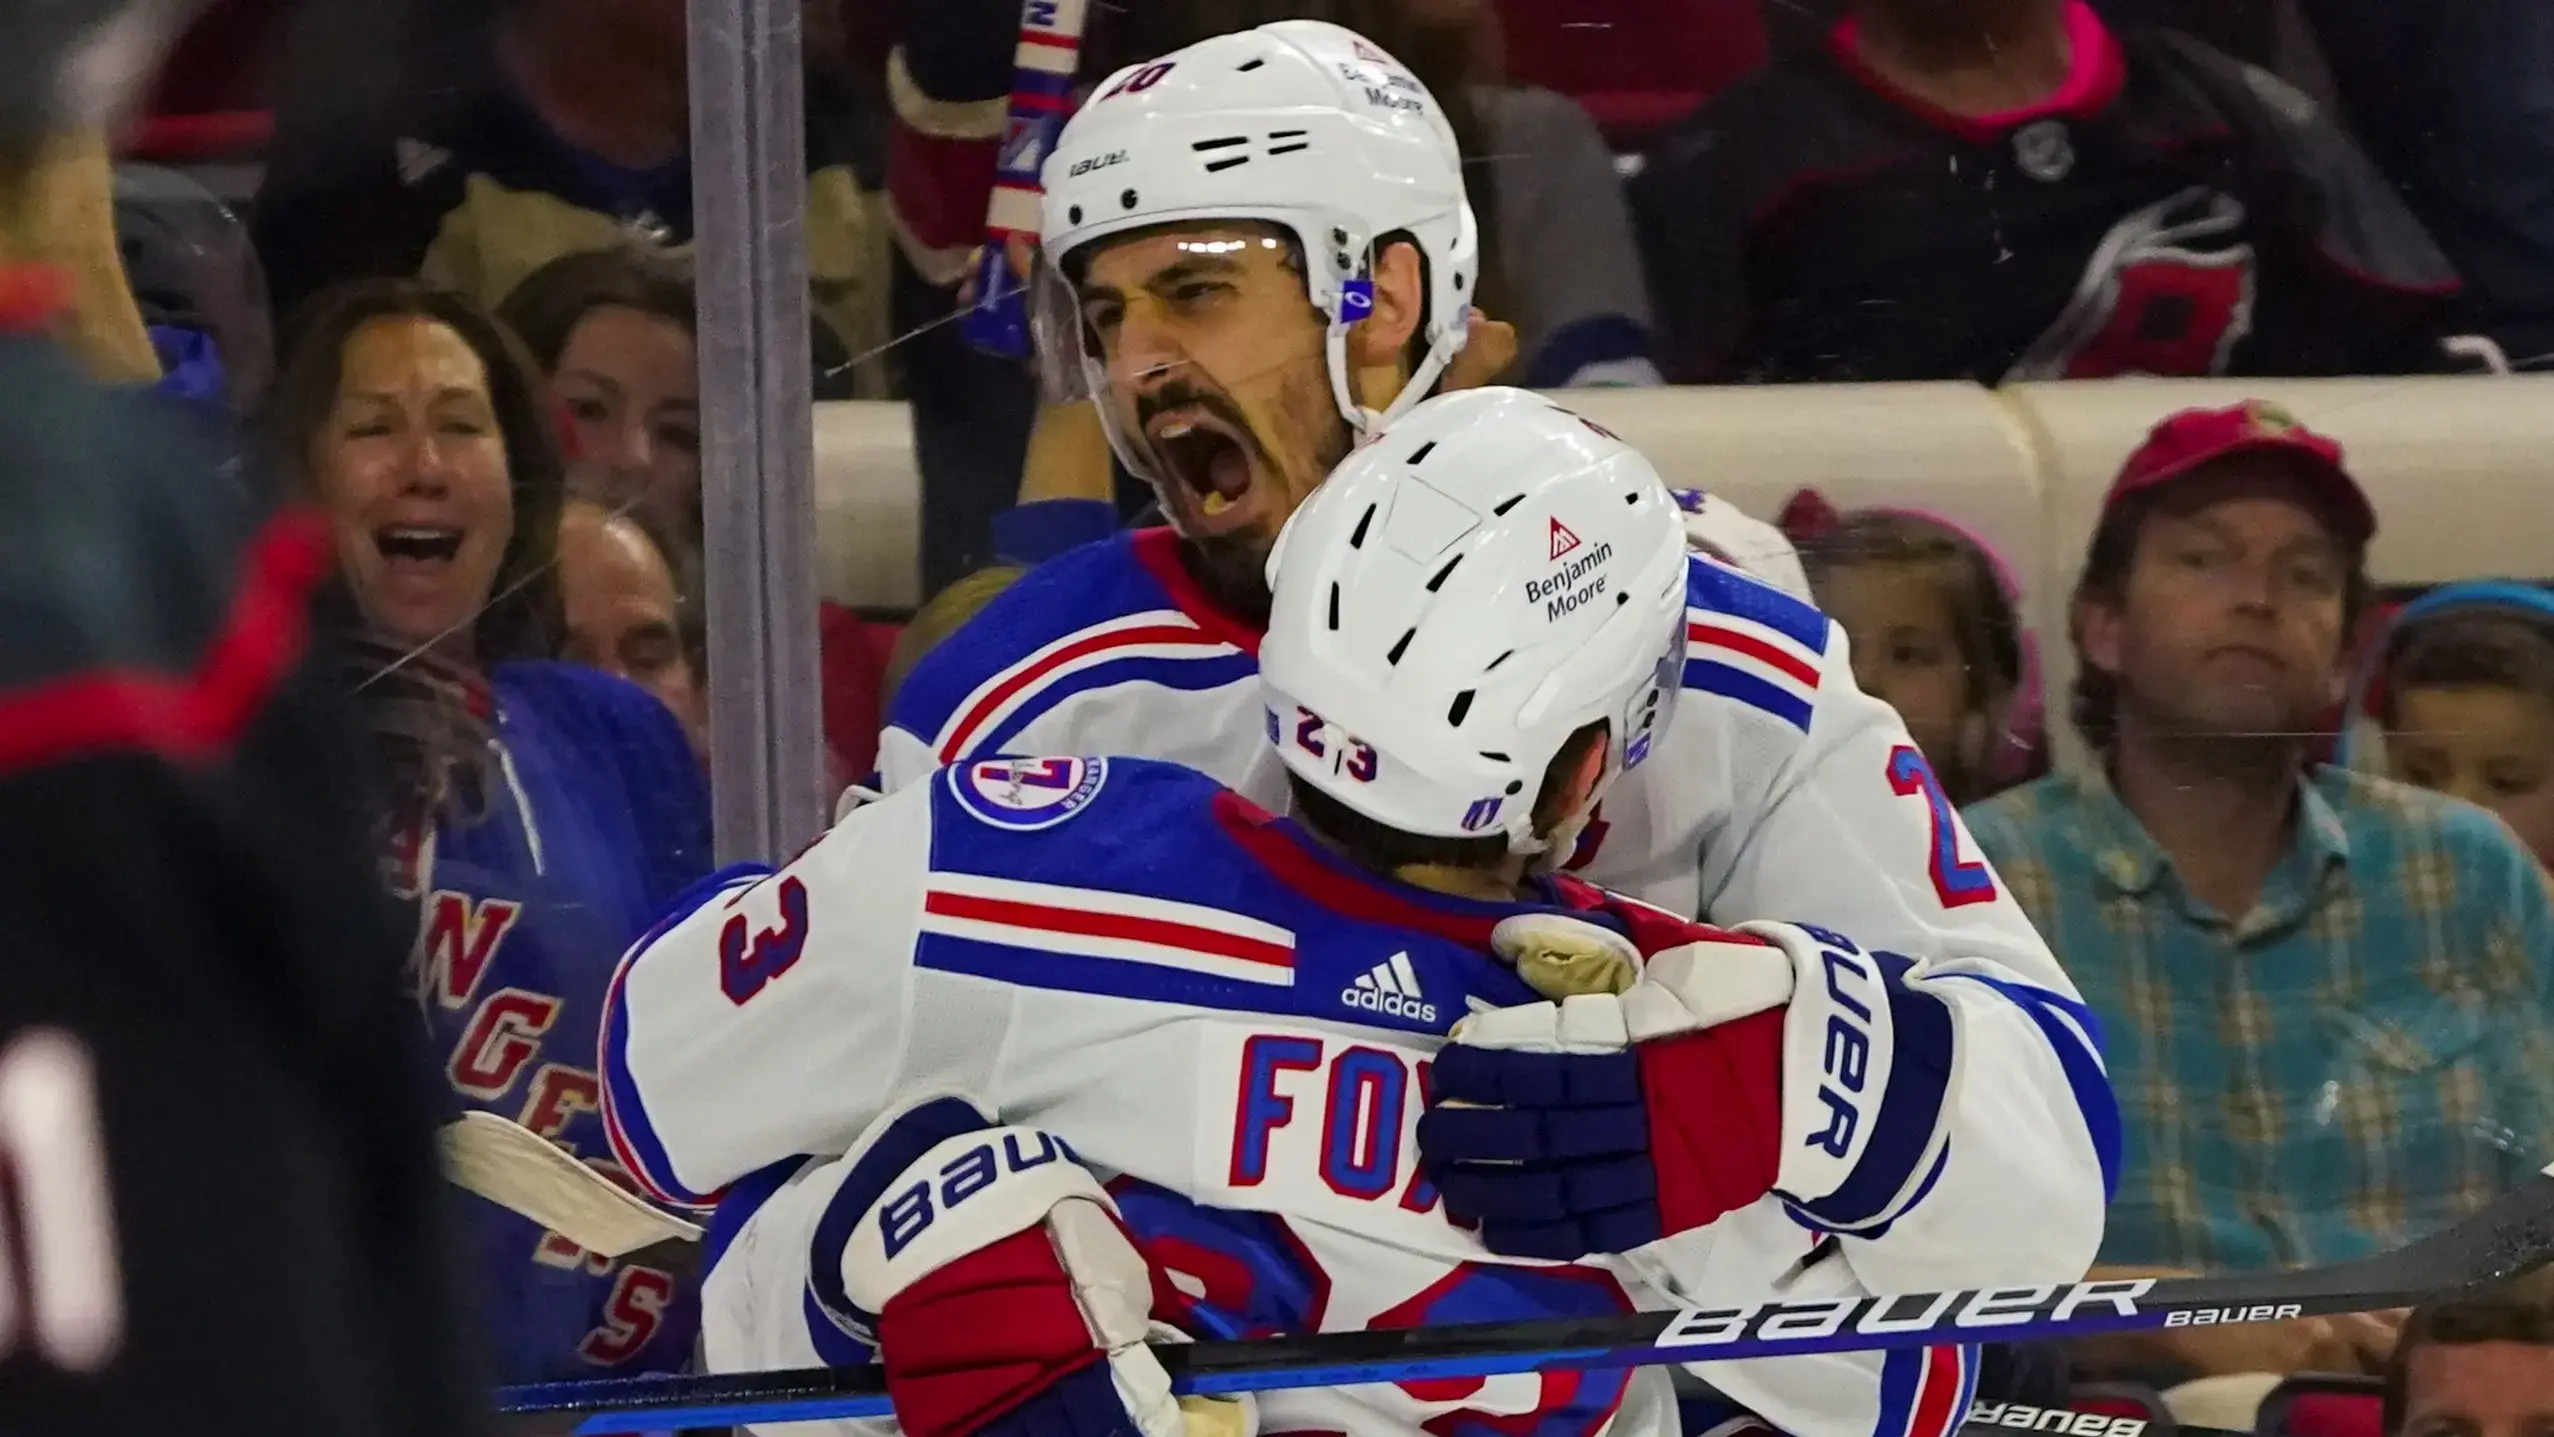 May 30, 2022; Raleigh, North Carolina, USA; New York Rangers left wing Chris Kreider (20) is congratulated by defenseman Adam Fox (23) after his goal against the Carolina Hurricanes during the third period in game seven of the second round of the 2022 Stanley Cup Playoffs at PNC Arena. Mandatory Credit: James Guillory-USA TODAY Sports / James Guillory-USA TODAY Sports